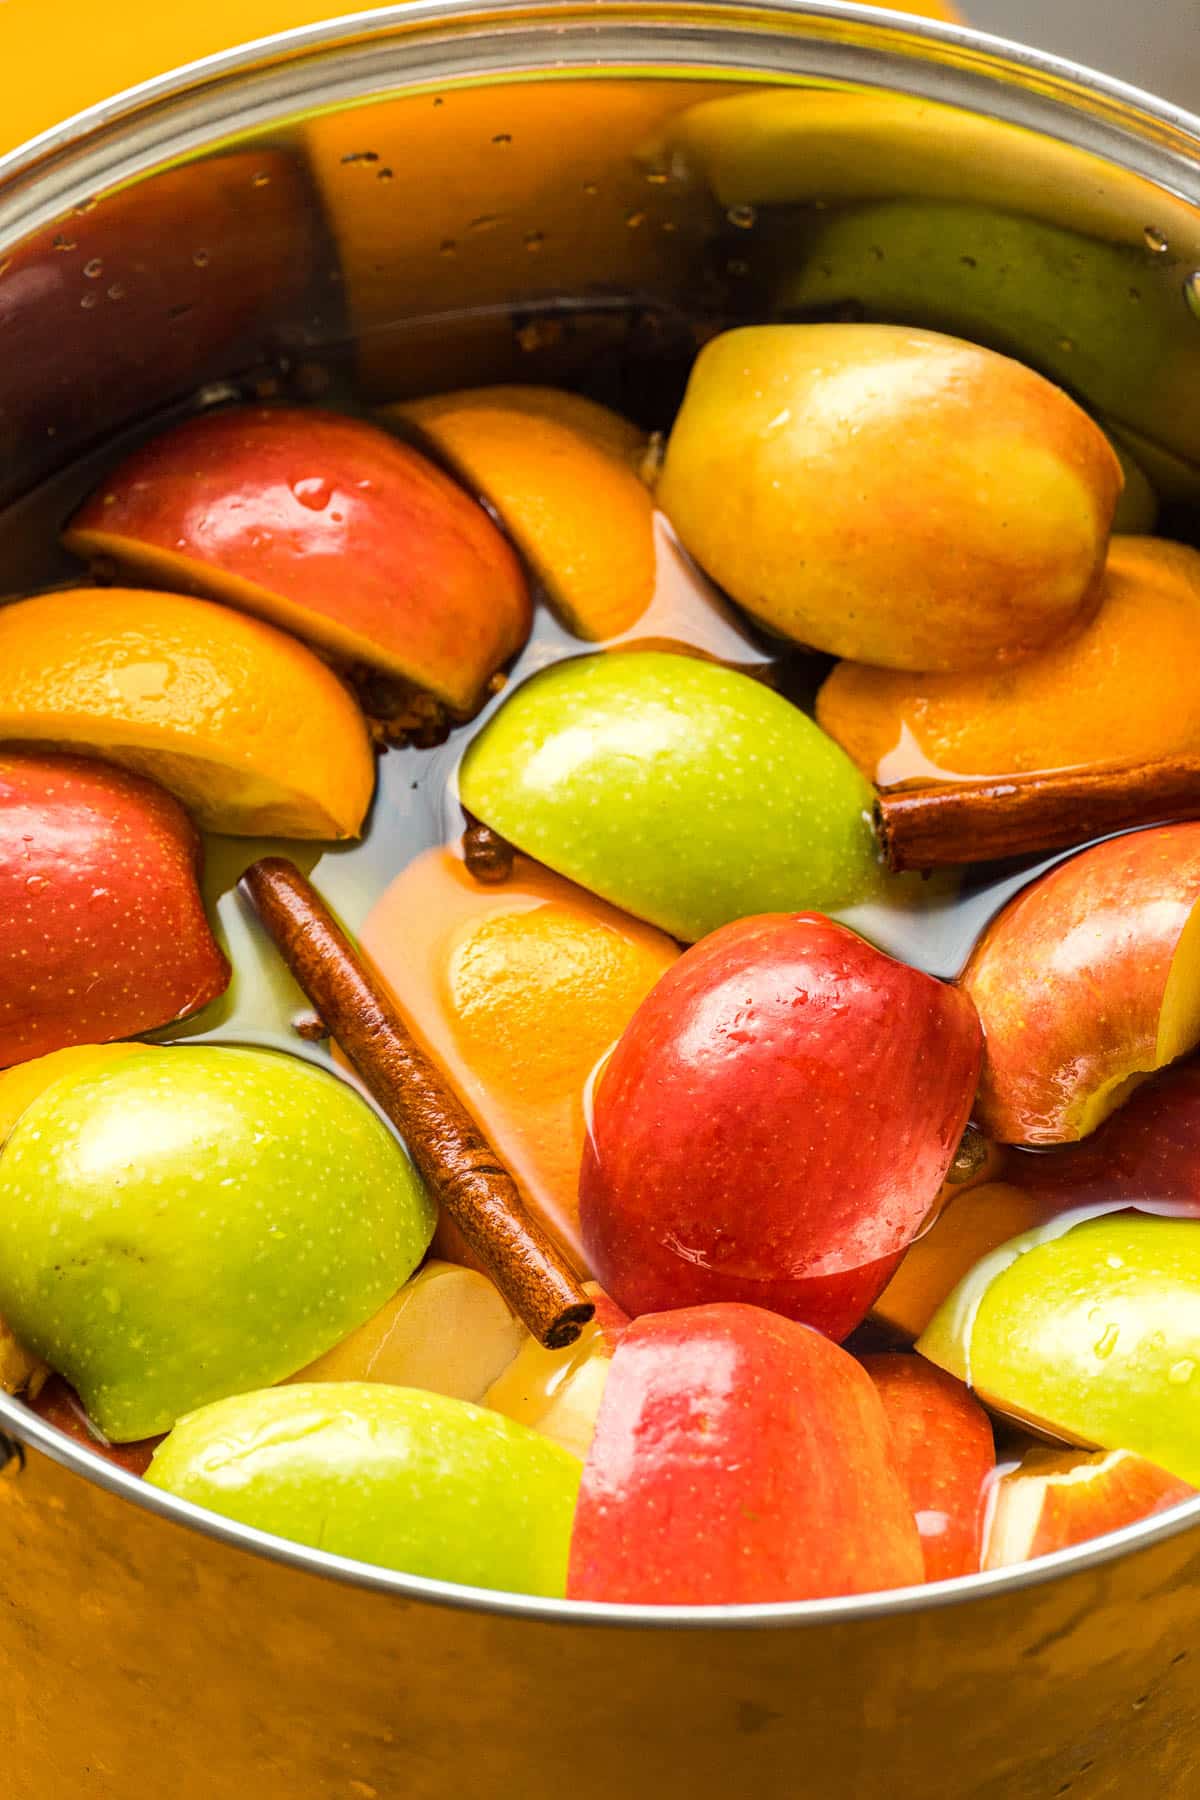 Apples, oranges, and spices in a large stock pot.